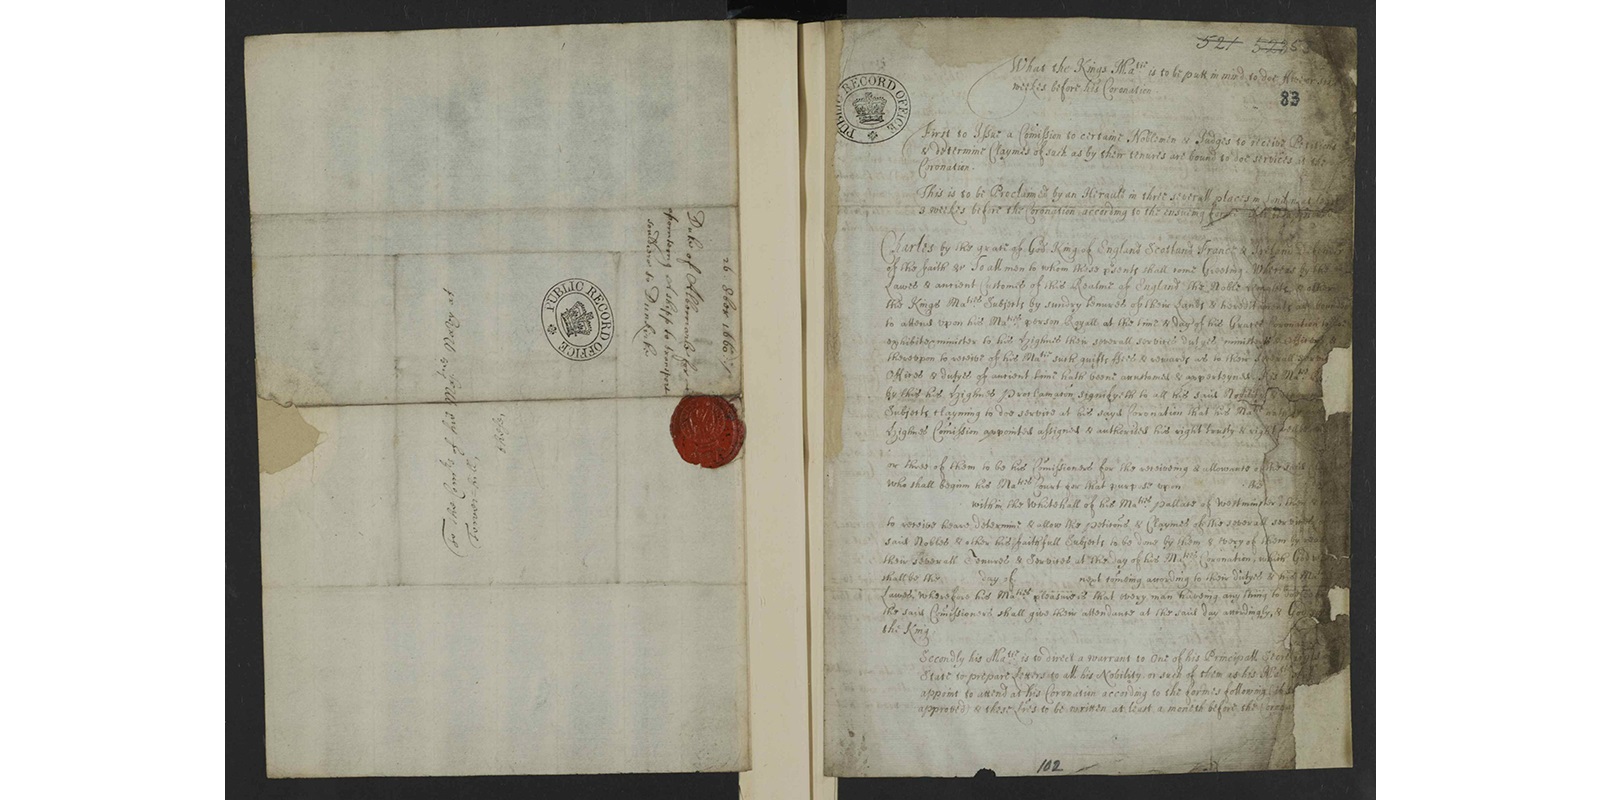 Hand-written document for Charles II's attention. A red wax seal is in the centre.